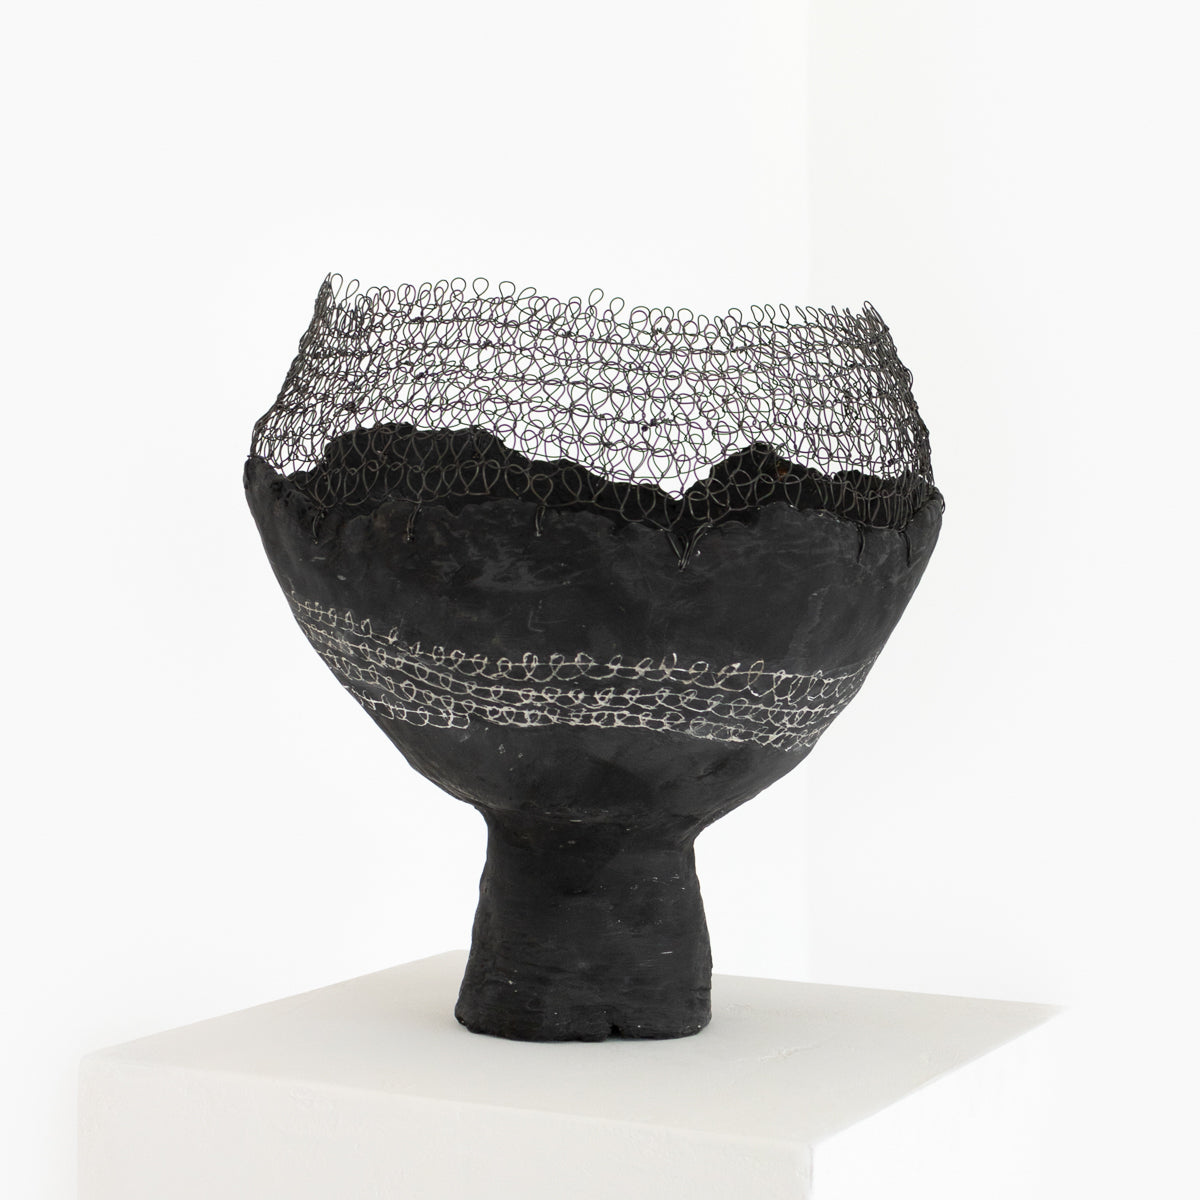 Handmade by designer Jennifer Alden, Vessel Study No. 39 is a contemporary sculpture made from paper clay, plaster, paint and wire. Each vessel in this collection is one-of-a-kind, rare, and both primitive and modern. 